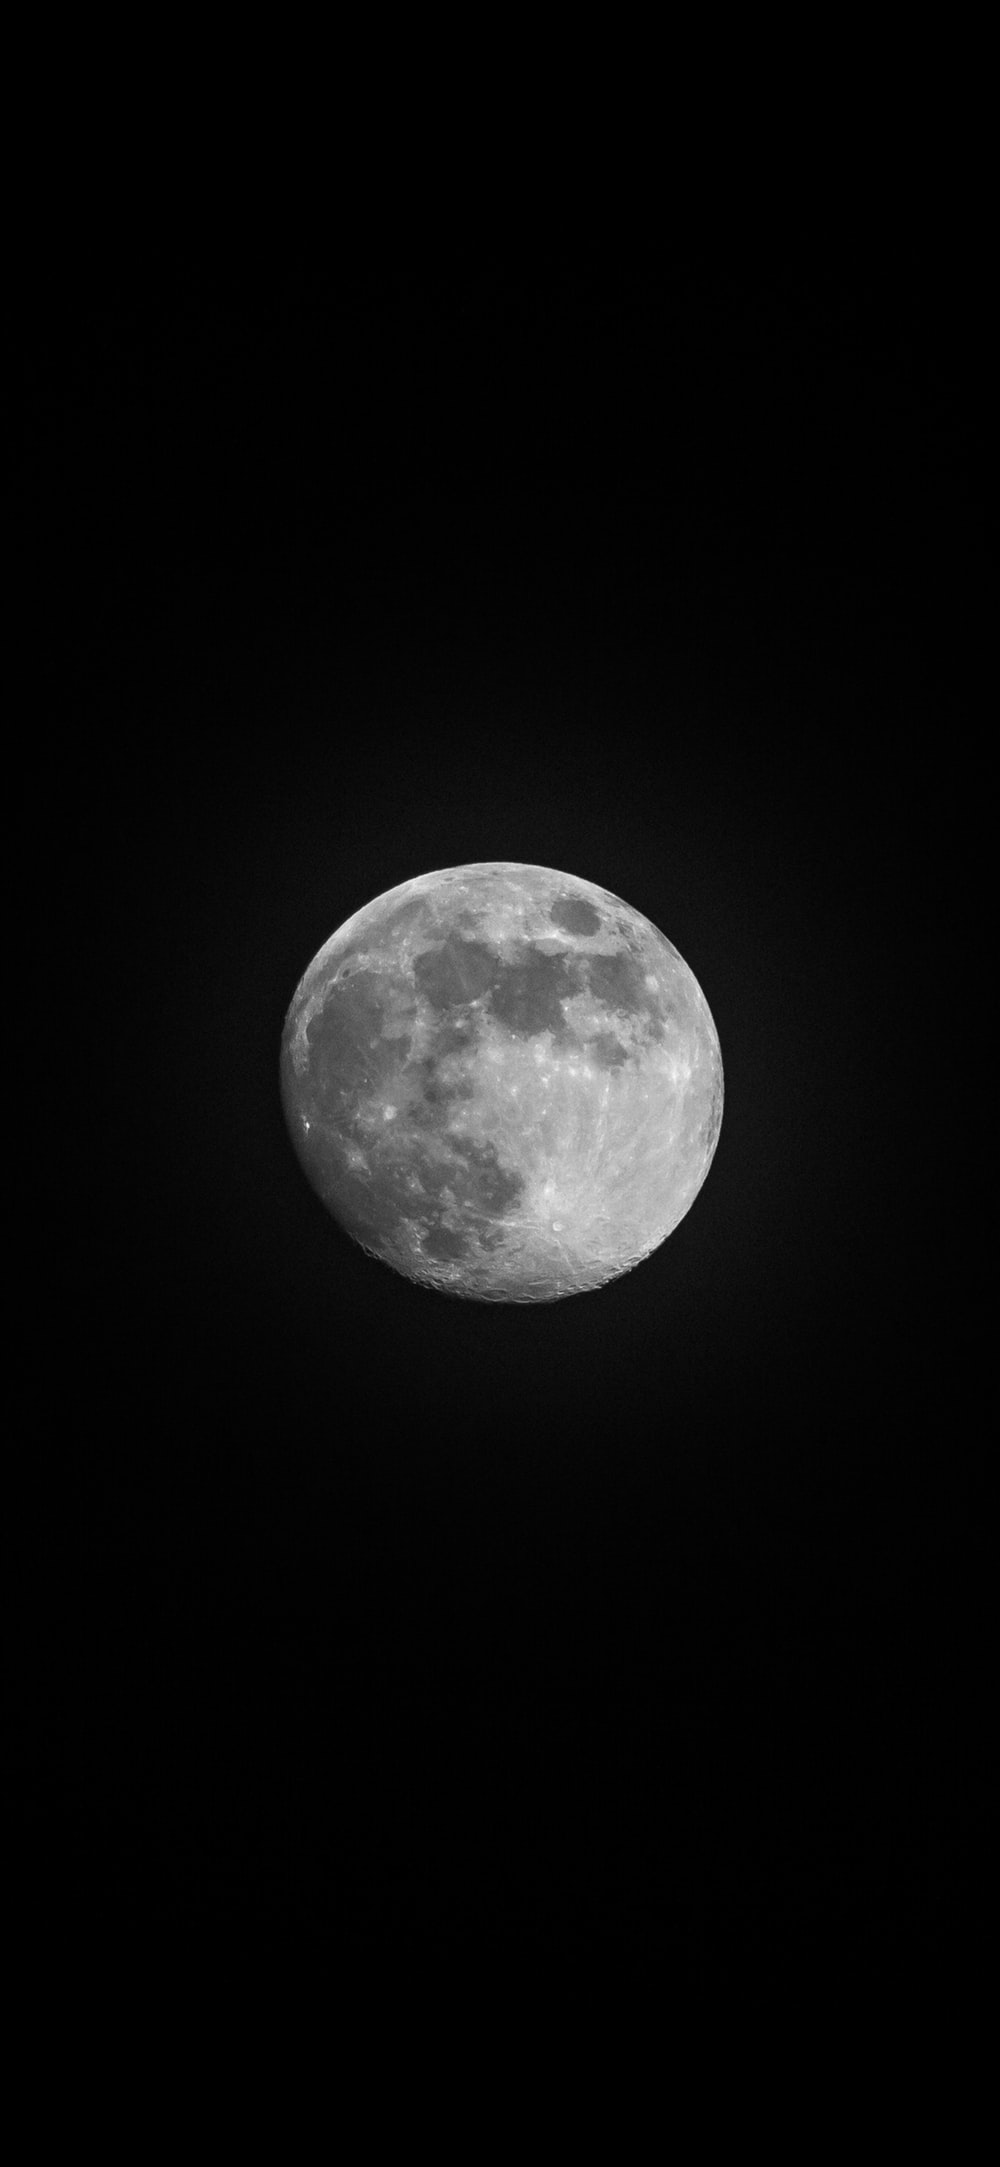 Black And White Moon Picture. Download Free Image